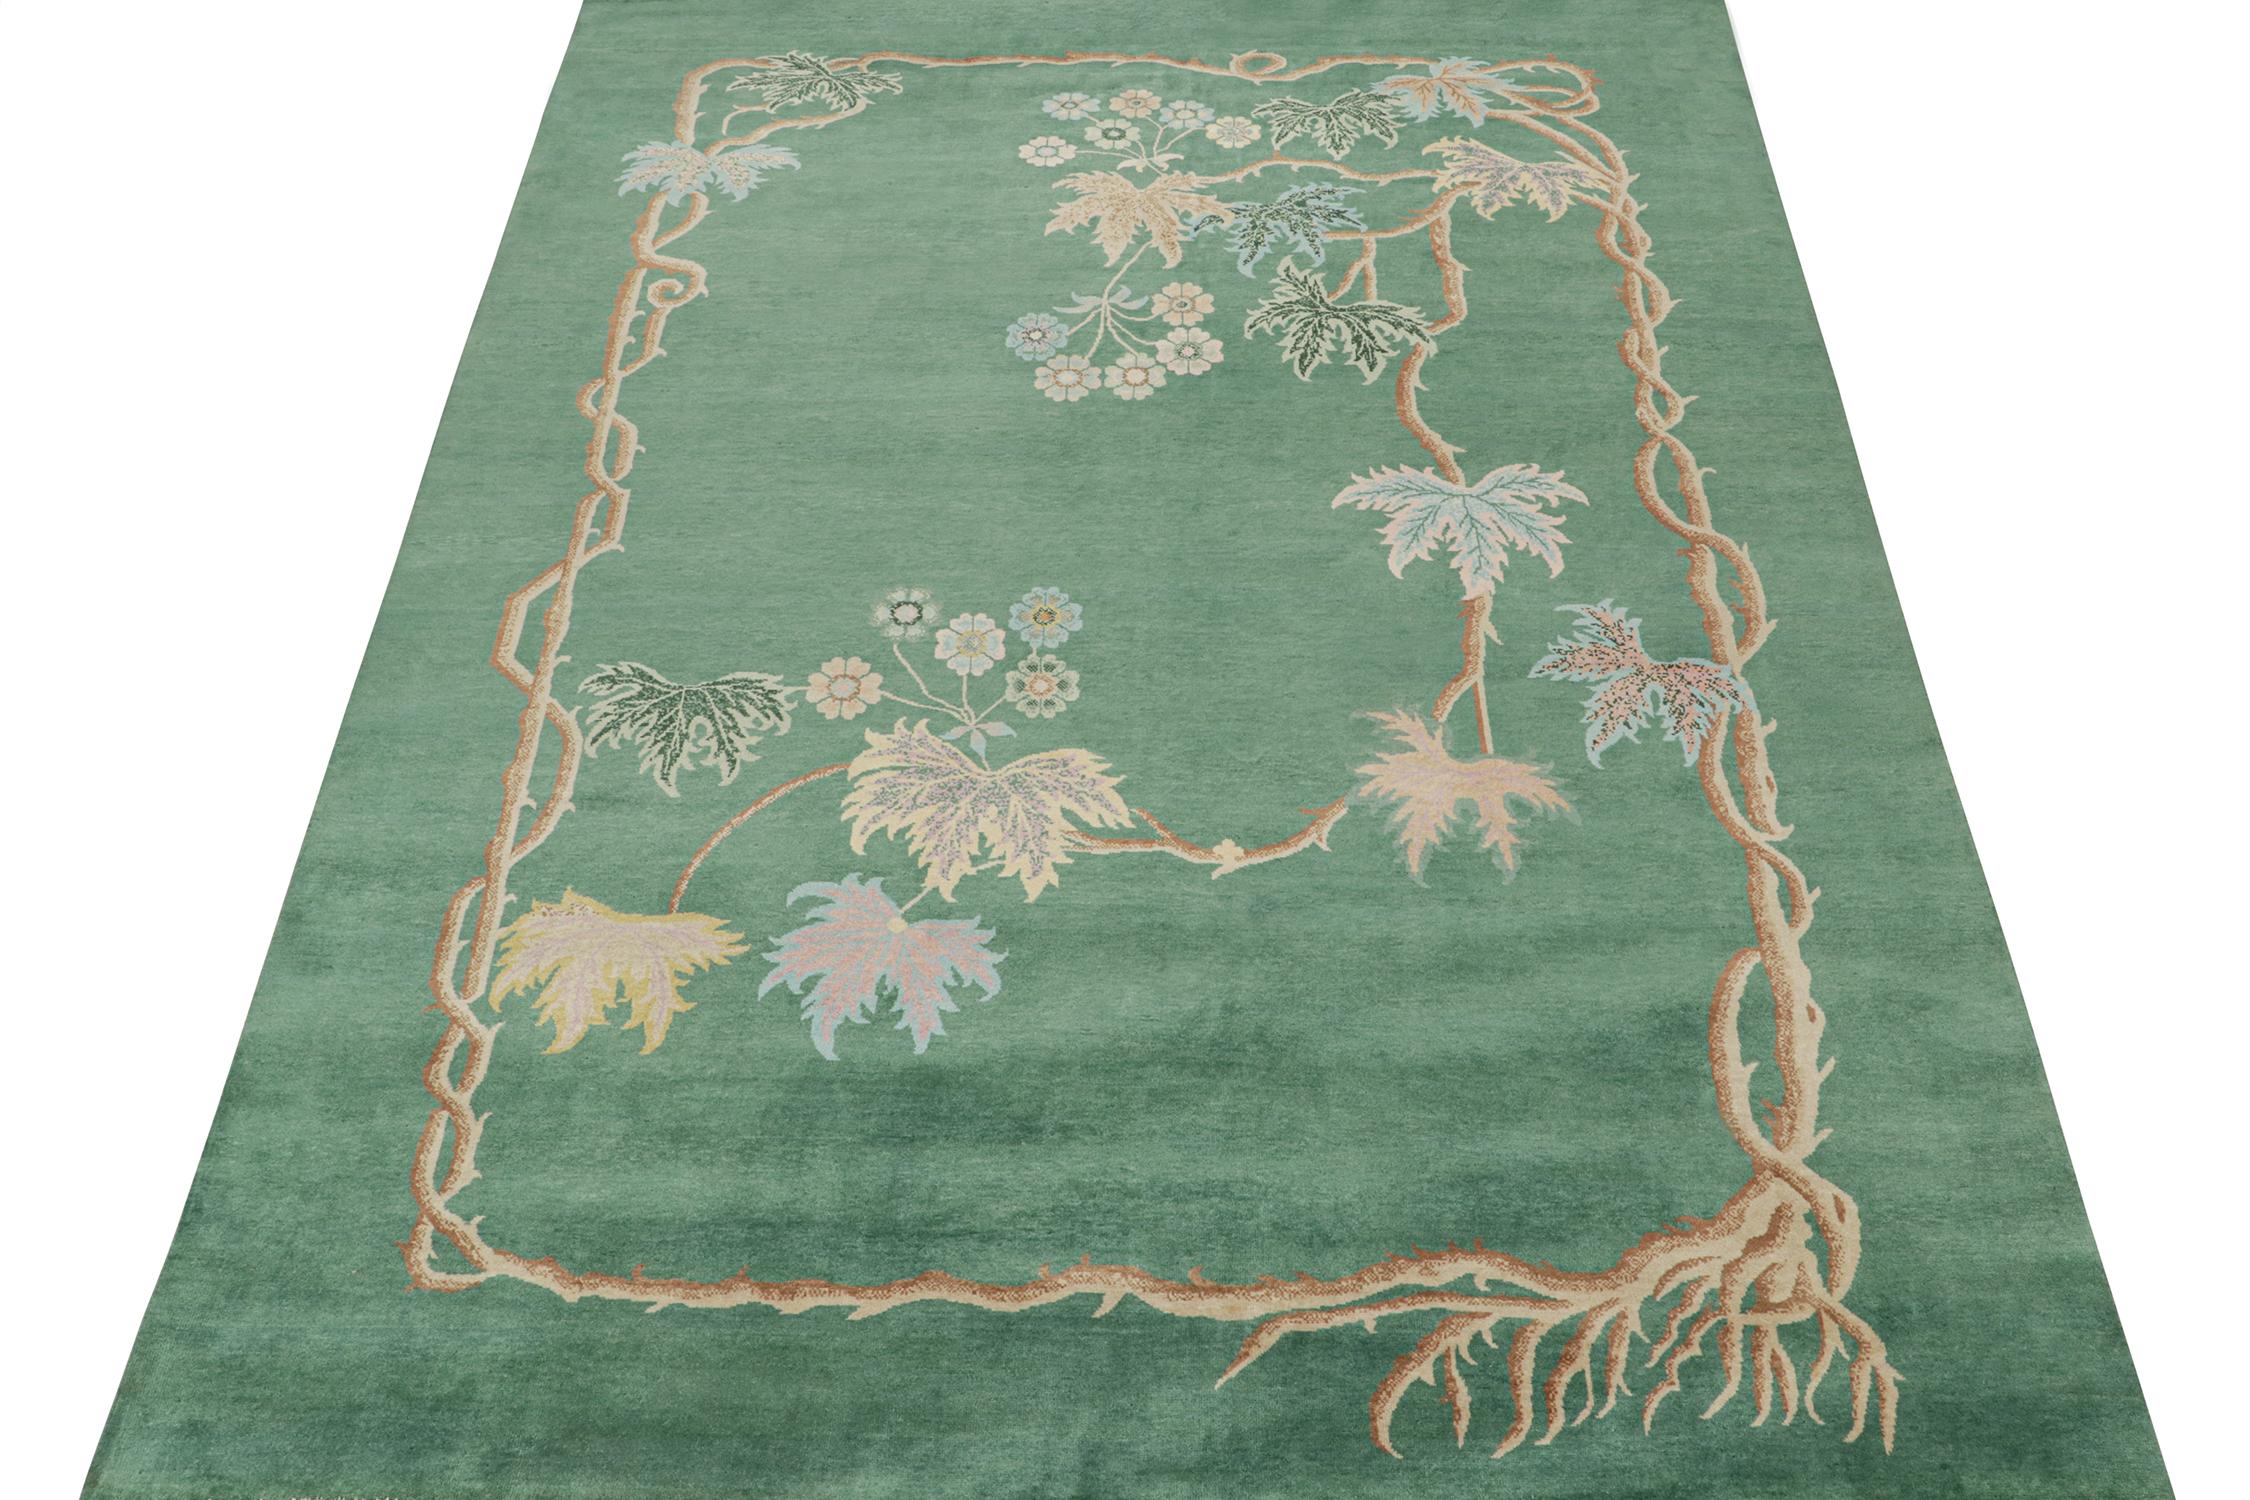 This 9x12 ode to Chinese Art Deco rugs is the next addition to Rug & Kilim's inspired new Deco Collection. 

Further On the Design:

The piece enjoys an emphasis on forest green with teal notes, and a finely detailed floral patterns within.